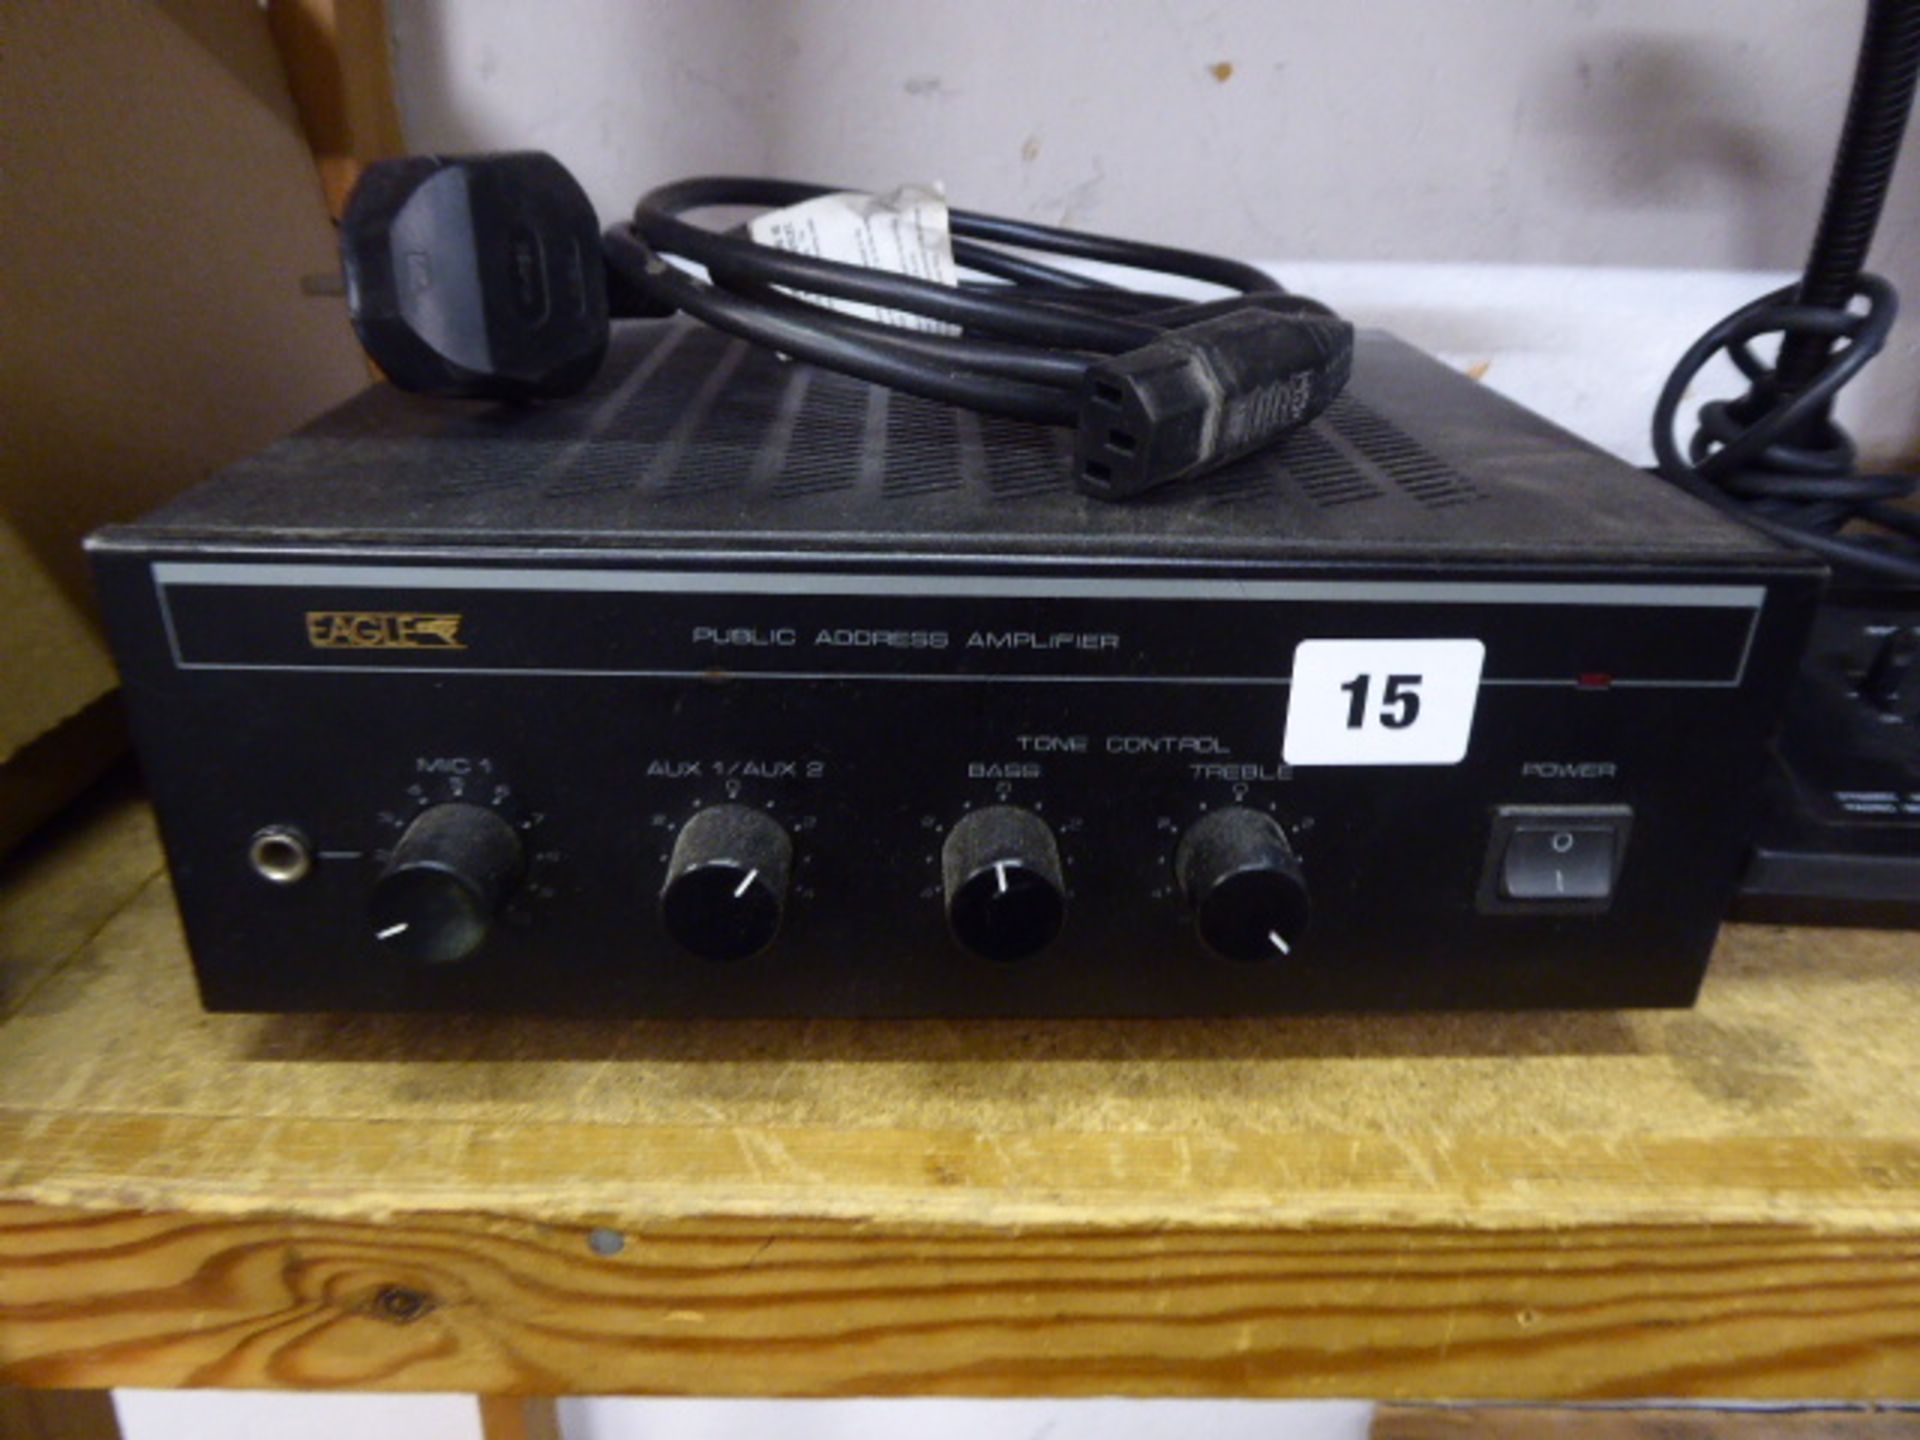 Eagle public address amplifier with eagle microphone and speaker - Image 2 of 3